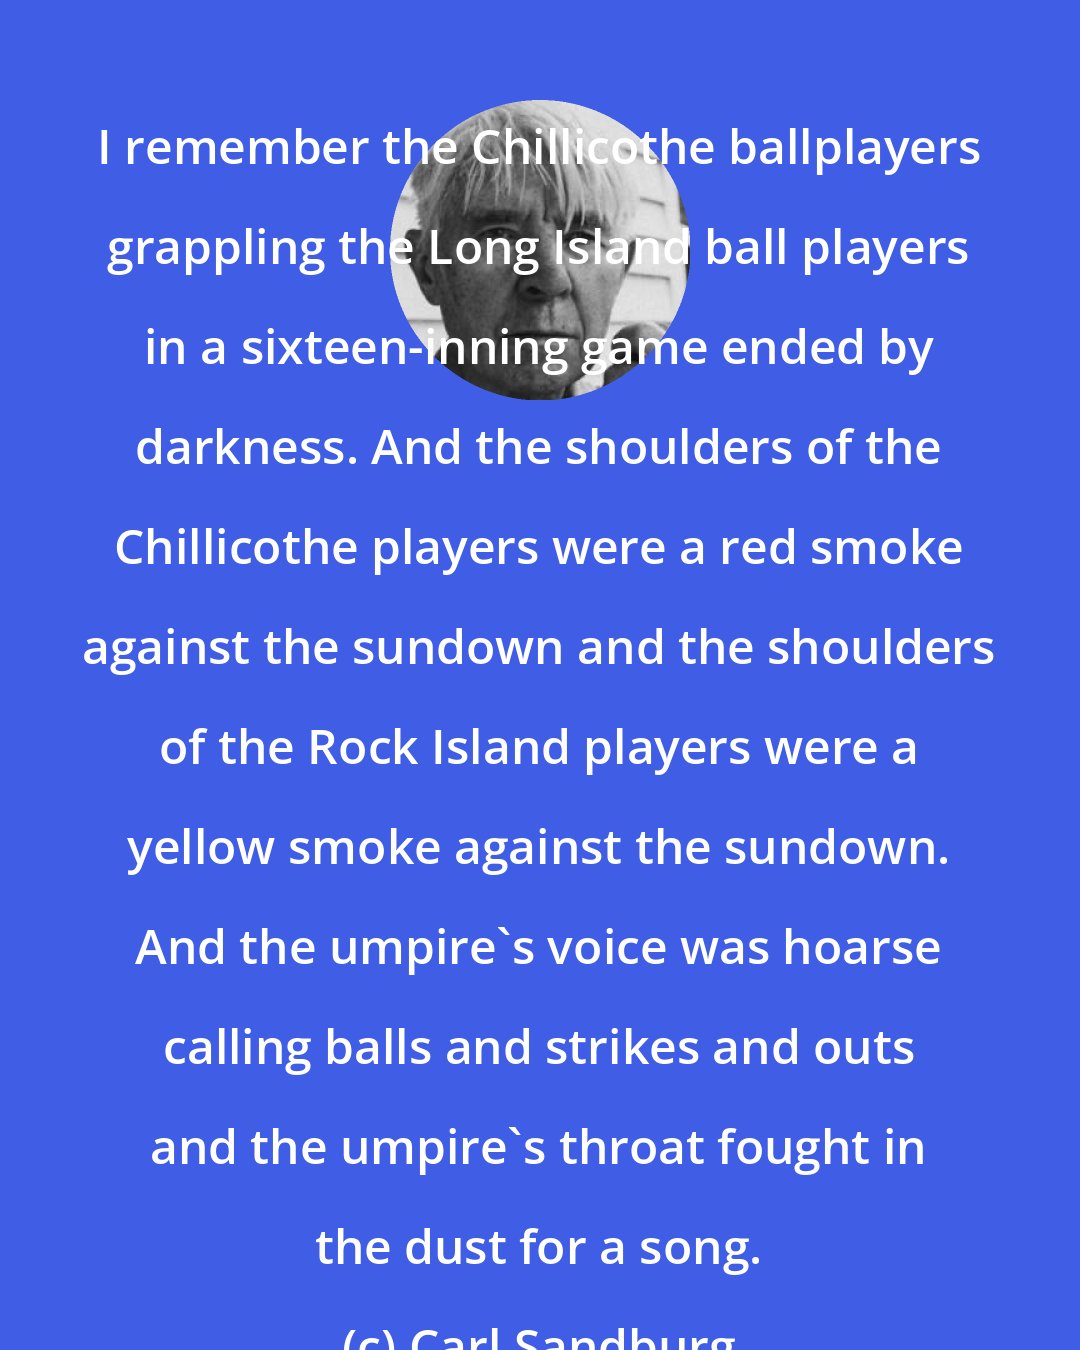 Carl Sandburg: I remember the Chillicothe ballplayers grappling the Long Island ball players in a sixteen-inning game ended by darkness. And the shoulders of the Chillicothe players were a red smoke against the sundown and the shoulders of the Rock Island players were a yellow smoke against the sundown. And the umpire's voice was hoarse calling balls and strikes and outs and the umpire's throat fought in the dust for a song.